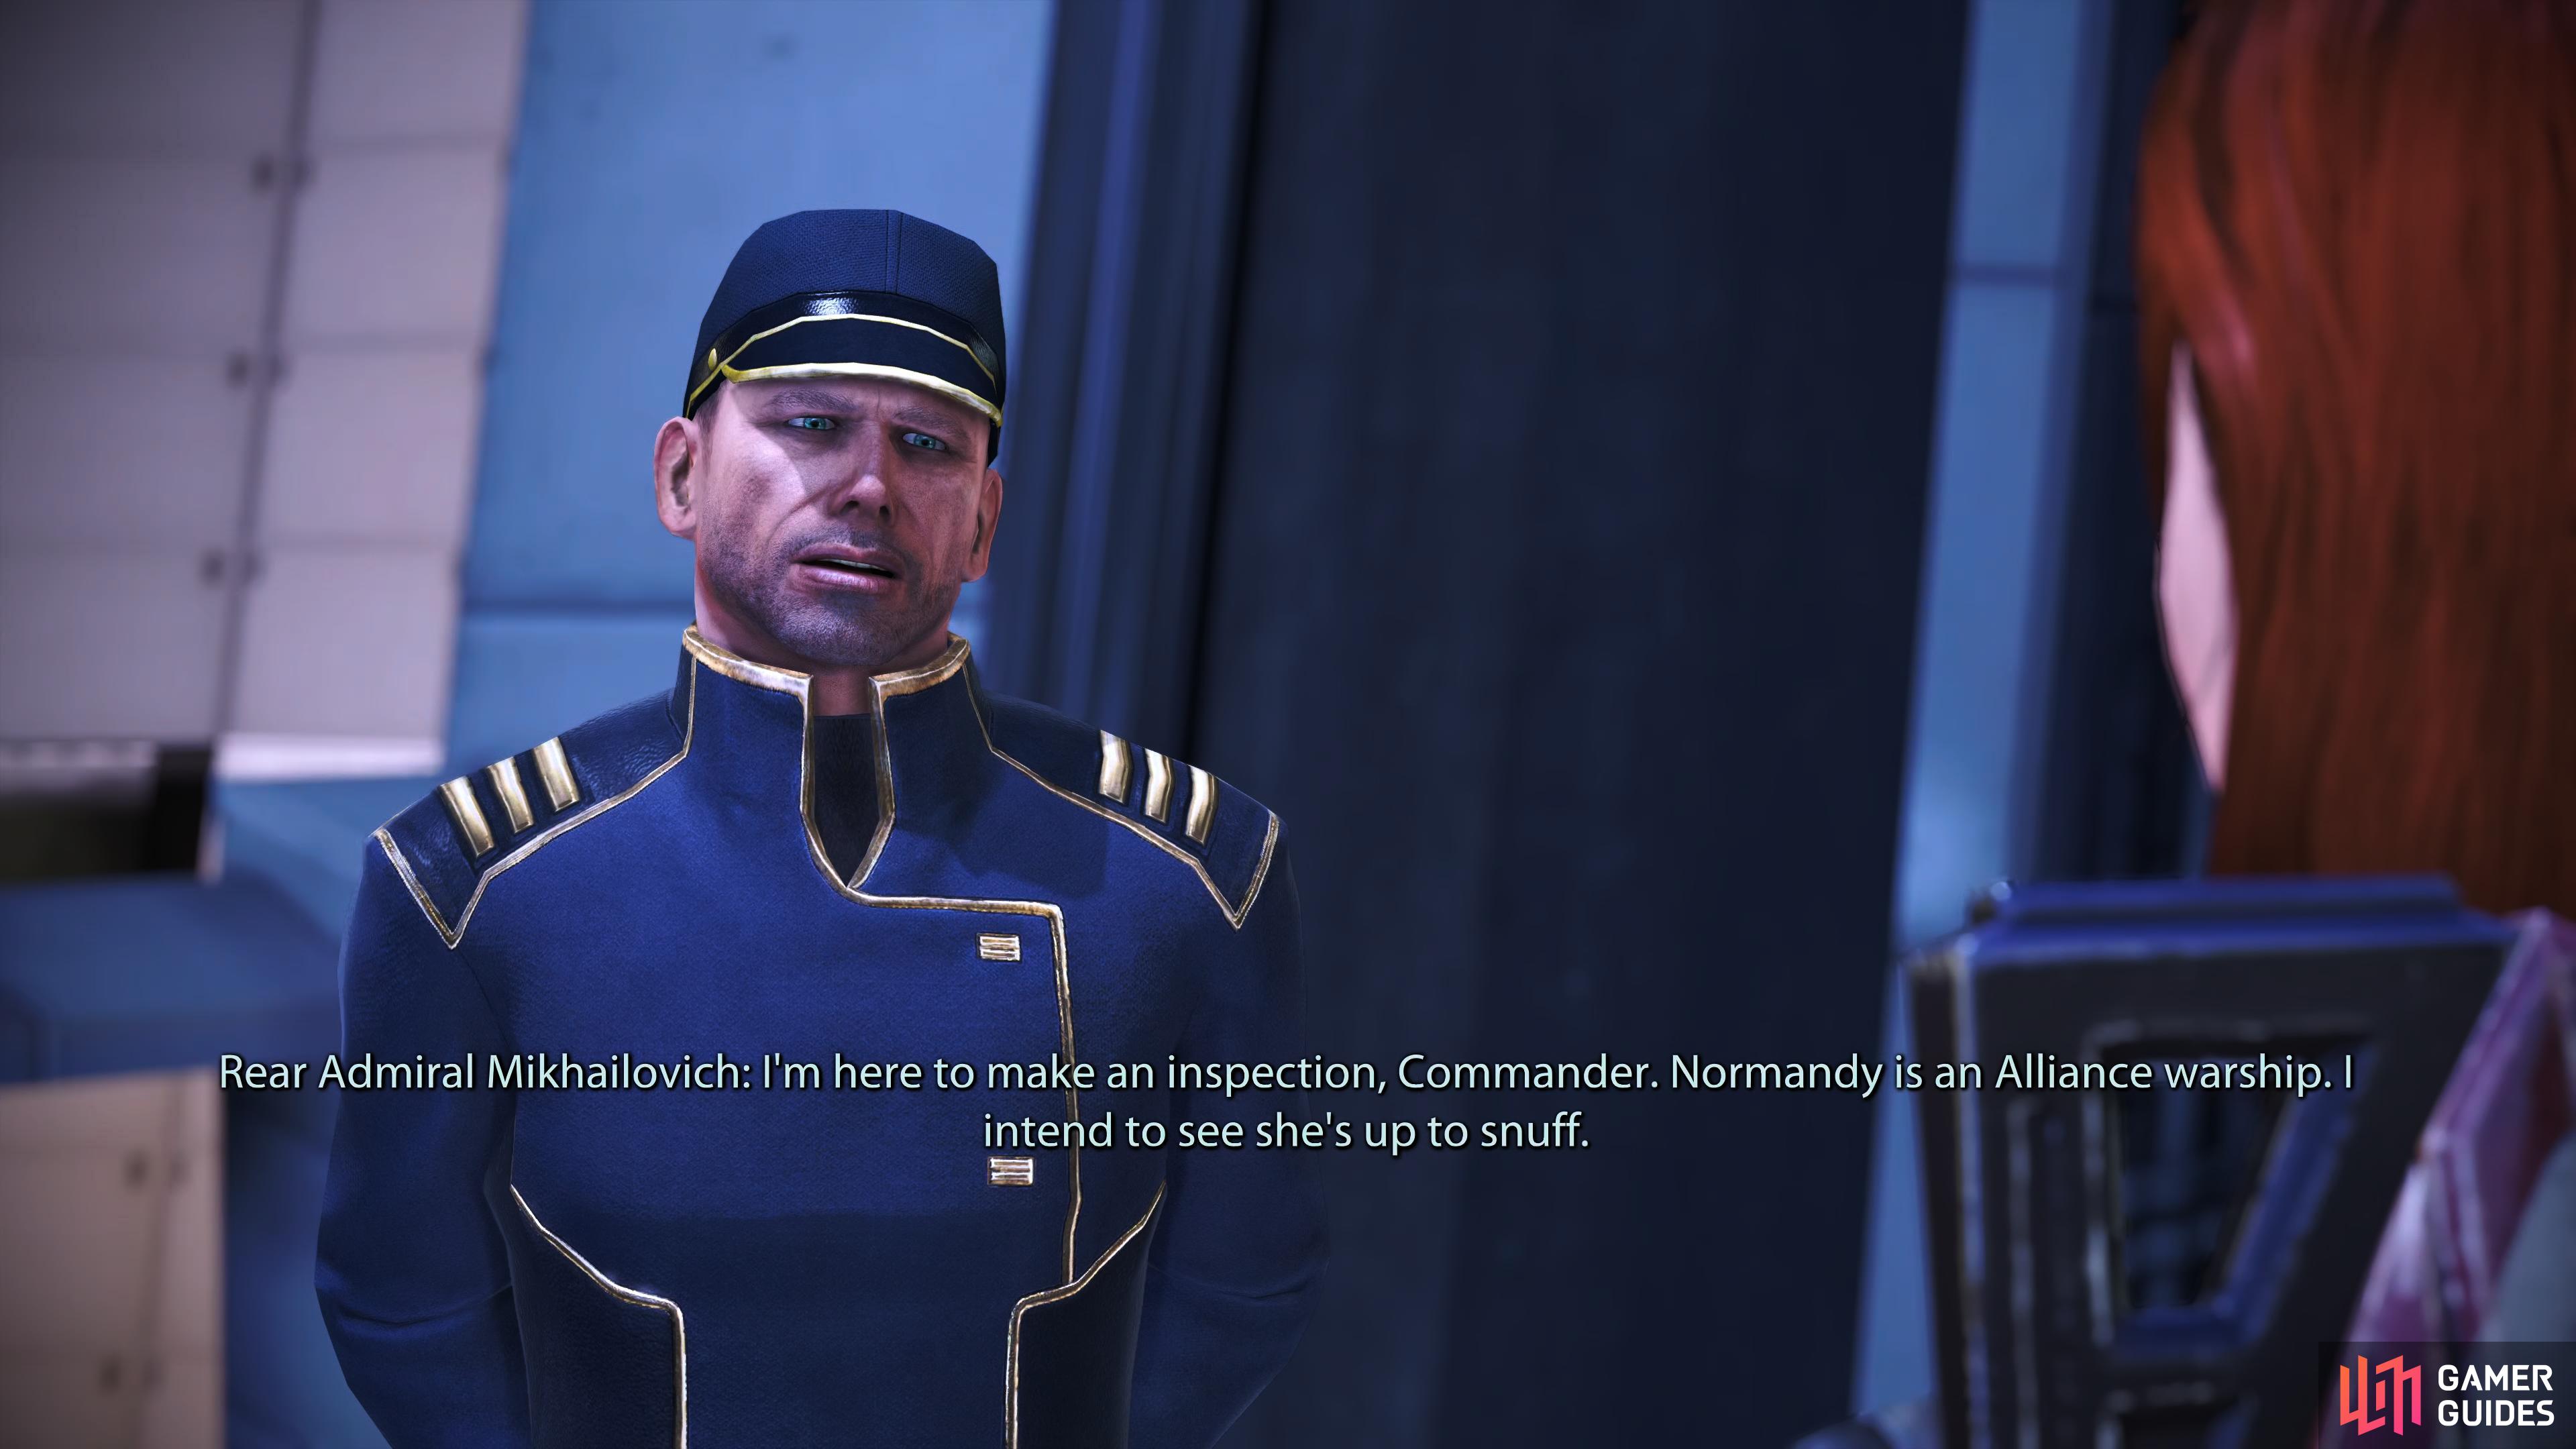 When you exit the Normandy, Rear Admiral Mikhailovich will look for excuses to complain about your ship.